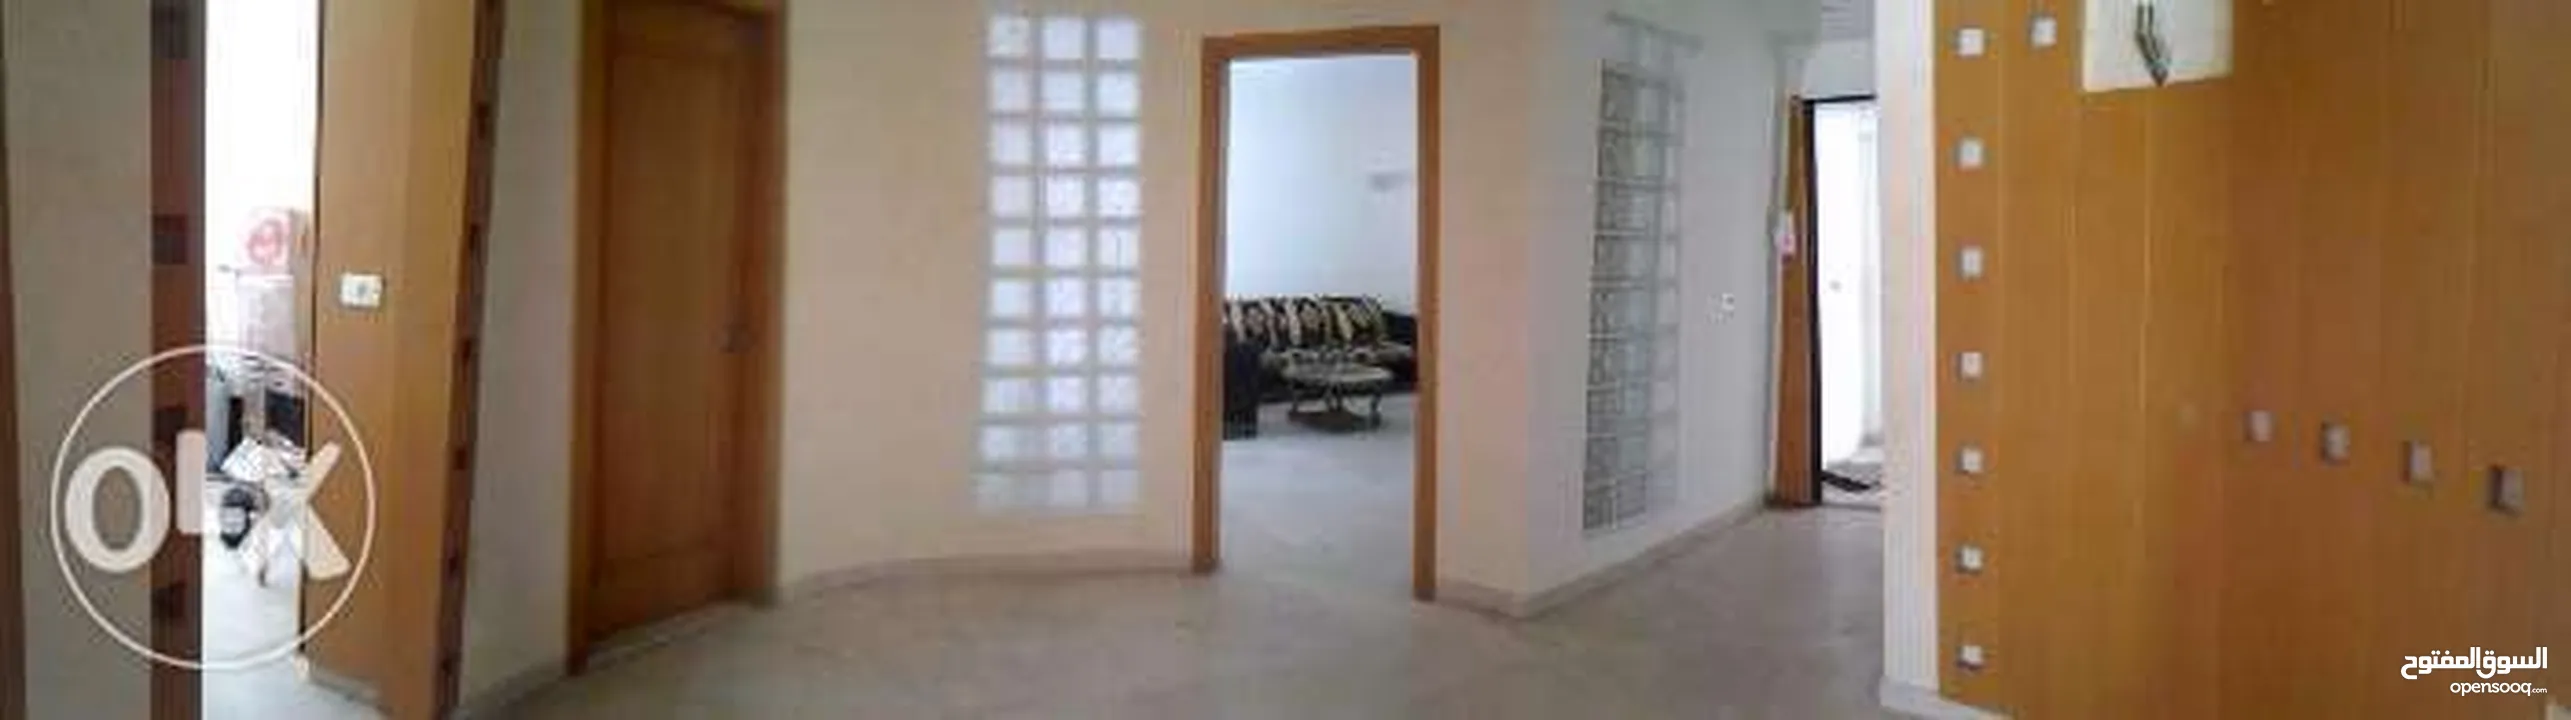 The ONLY Duplex House in Saida City 323meter +own garden 5 car spaces worth $410K  sell $320